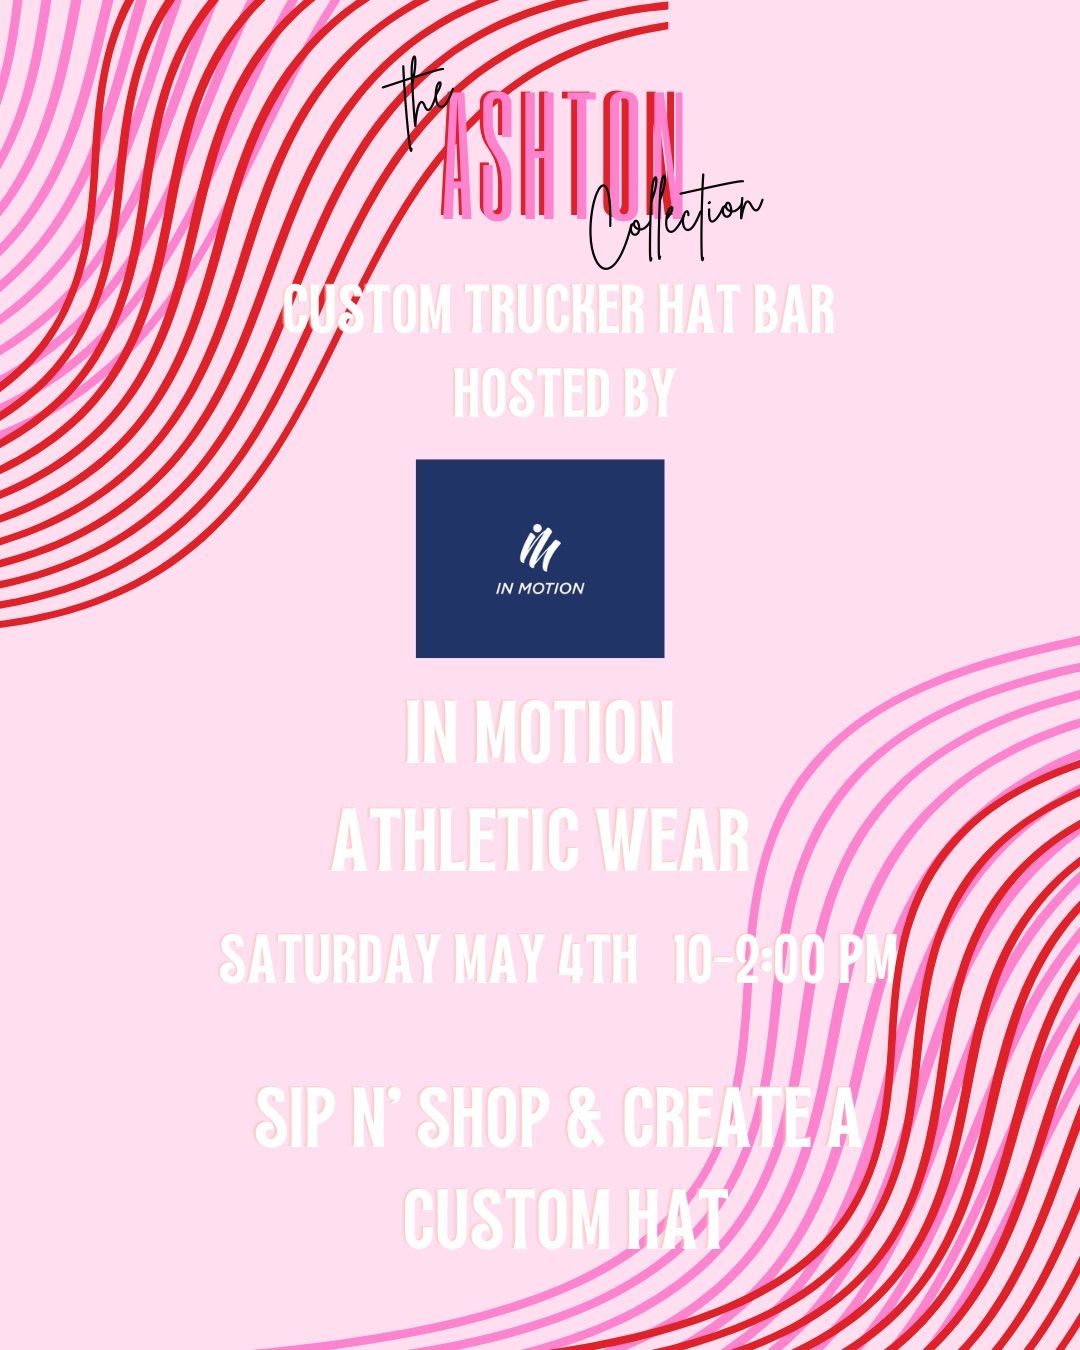 The Ashton Collection Hat Bar hosted by IN MOTION